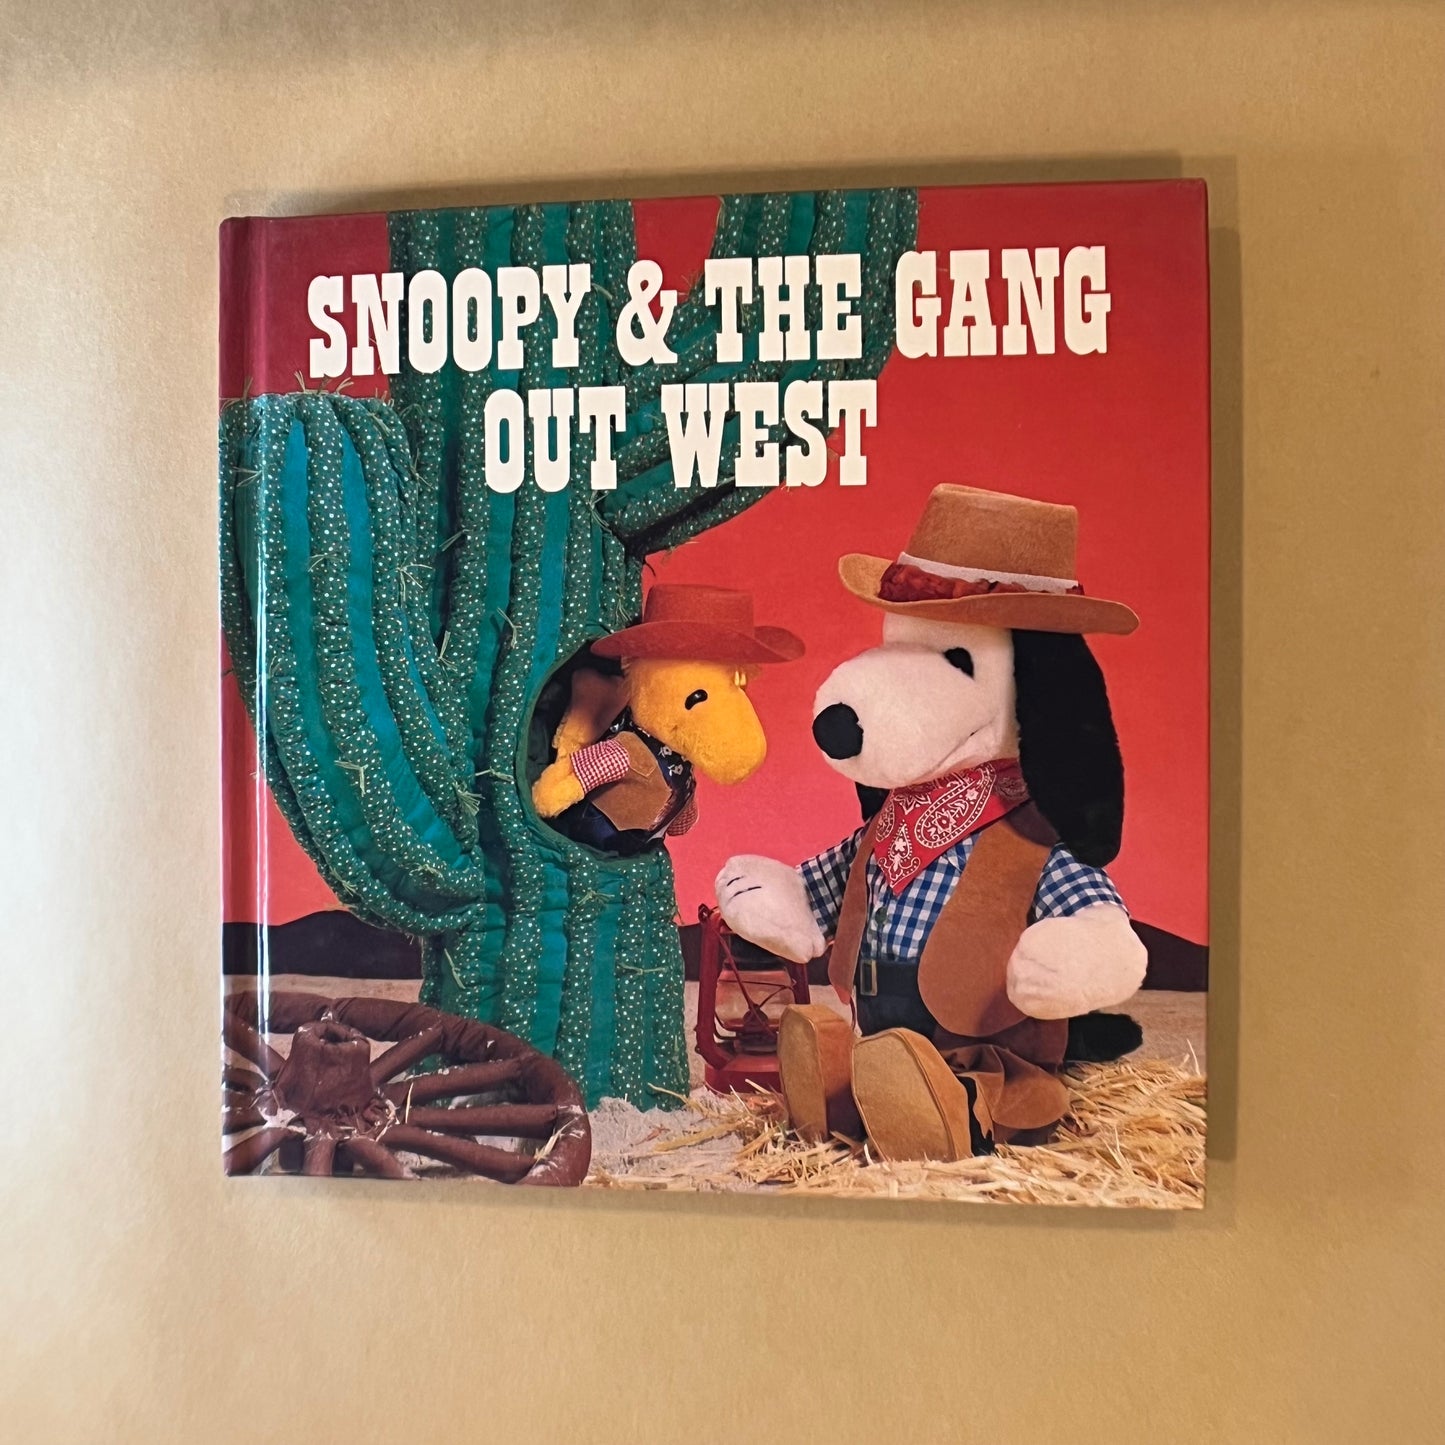 Snoopy & The Gang Out West